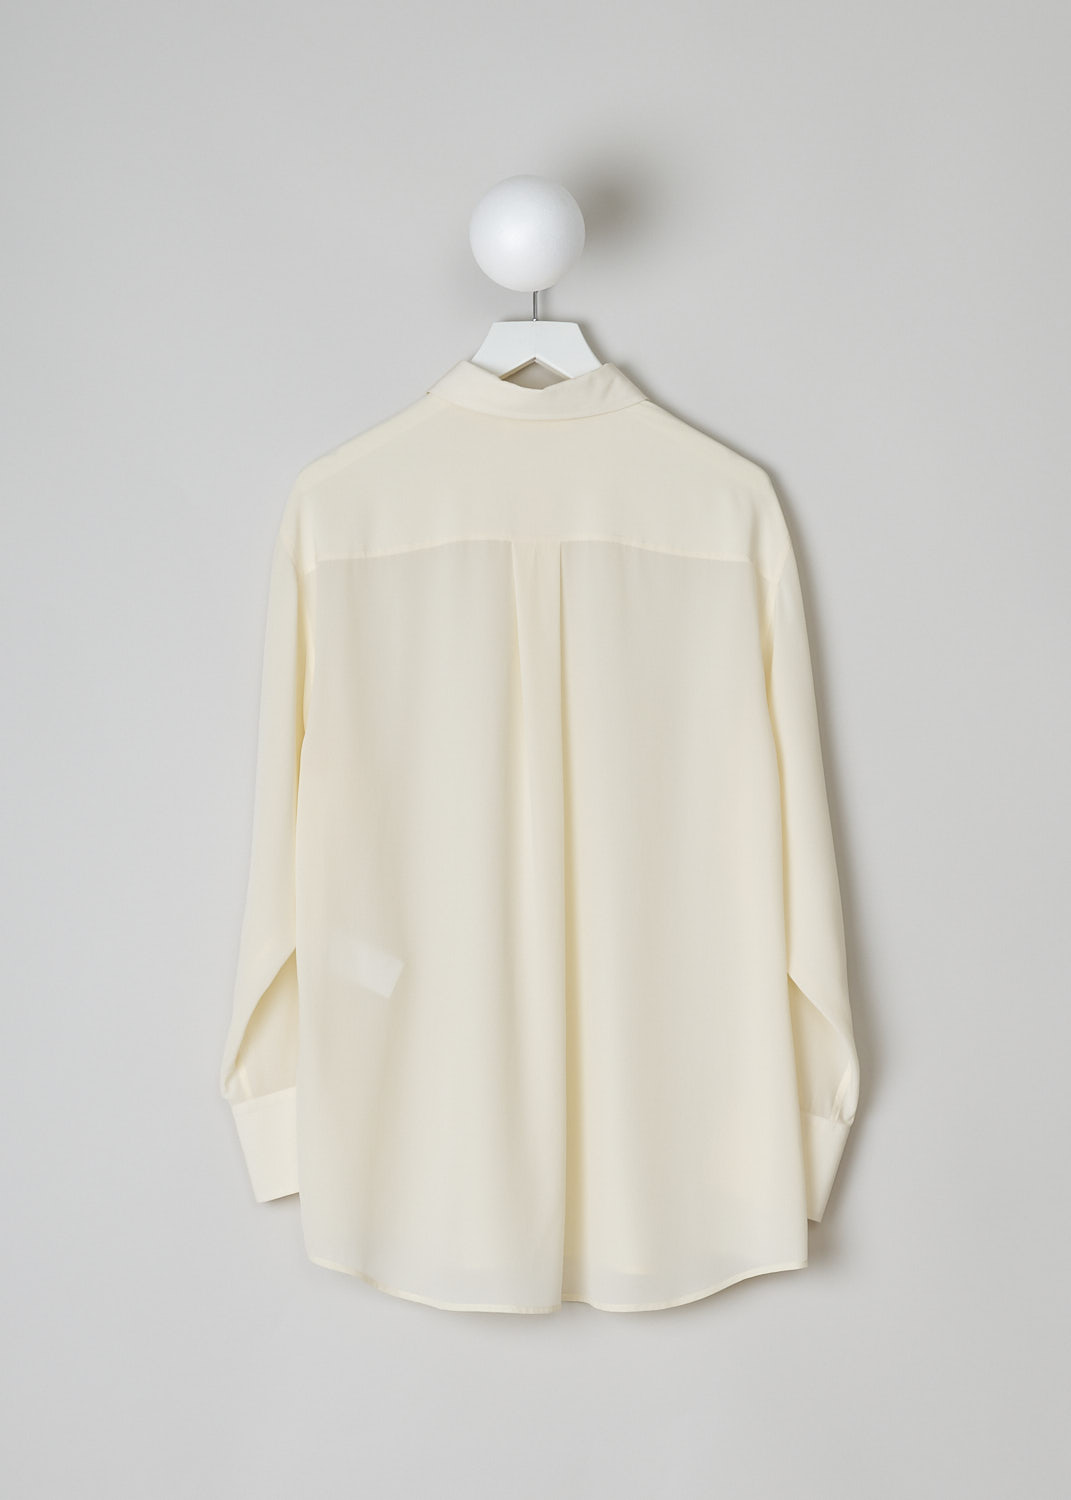 CHLOÉ, PRISTINE WHITE SILK BLOUSE, CHC22UHT05004114, White, Back, This silk Pristine White blouse has a classic collar and a button placket with round ceramic. The blouse has long sleeves with buttoned cuffs.  A centre box pleat runs vertically down the back.
